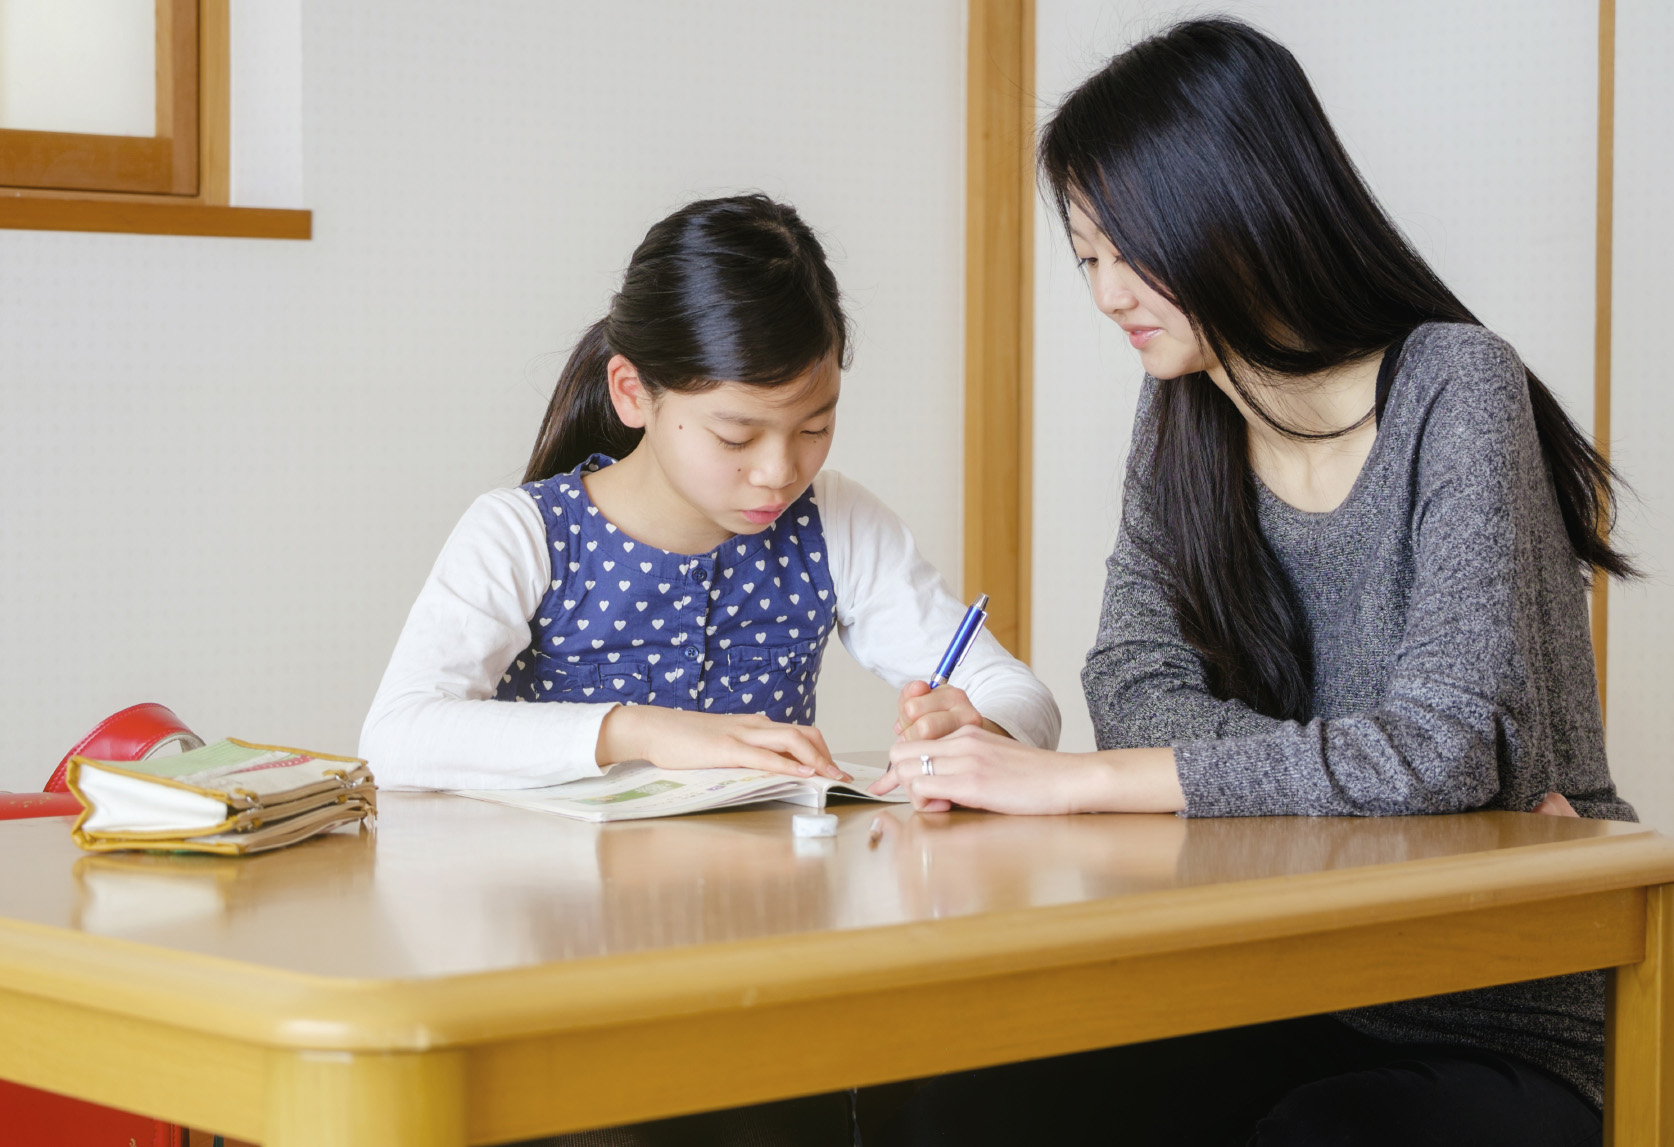 A young student works with her Austin math tutor on an assignment